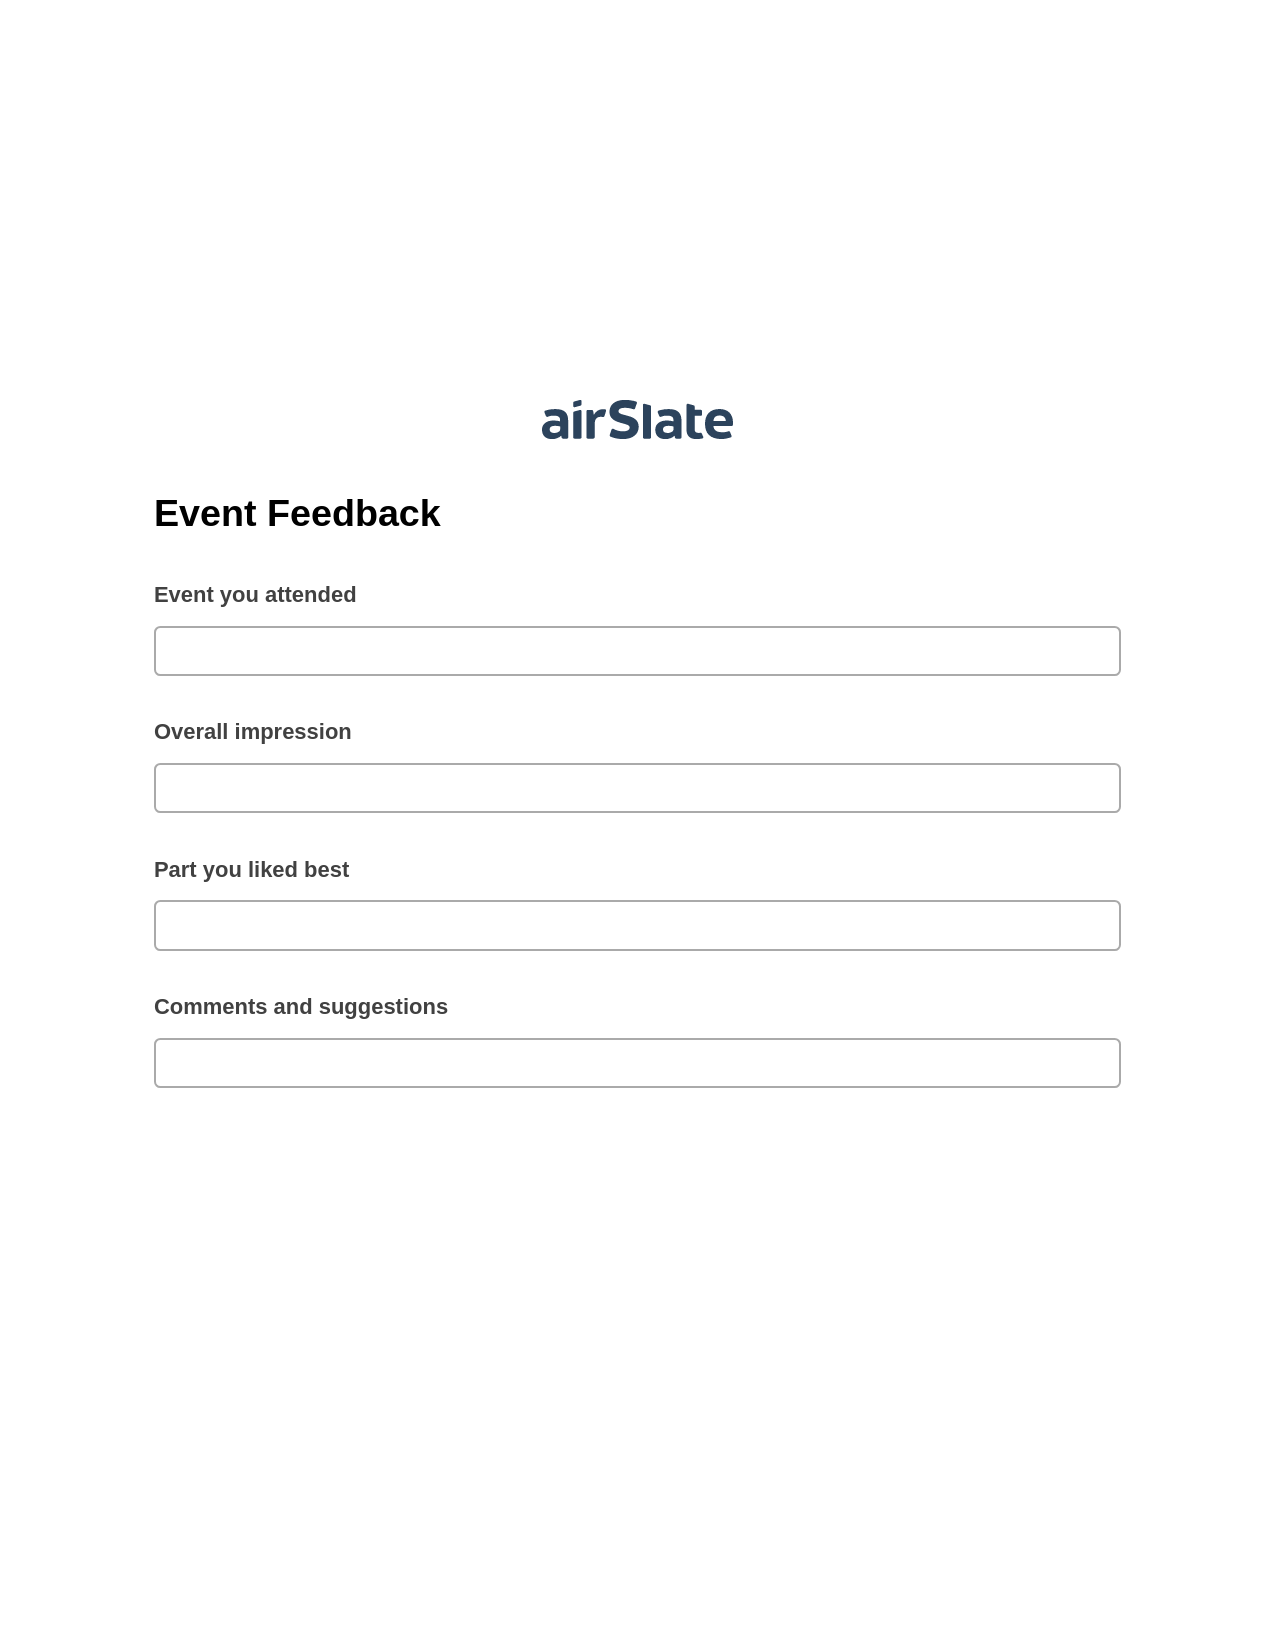 Event Feedback Pre-fill Slate from MS Dynamics 365 Records Bot, Create slate from another Flow Bot, Export to Smartsheet